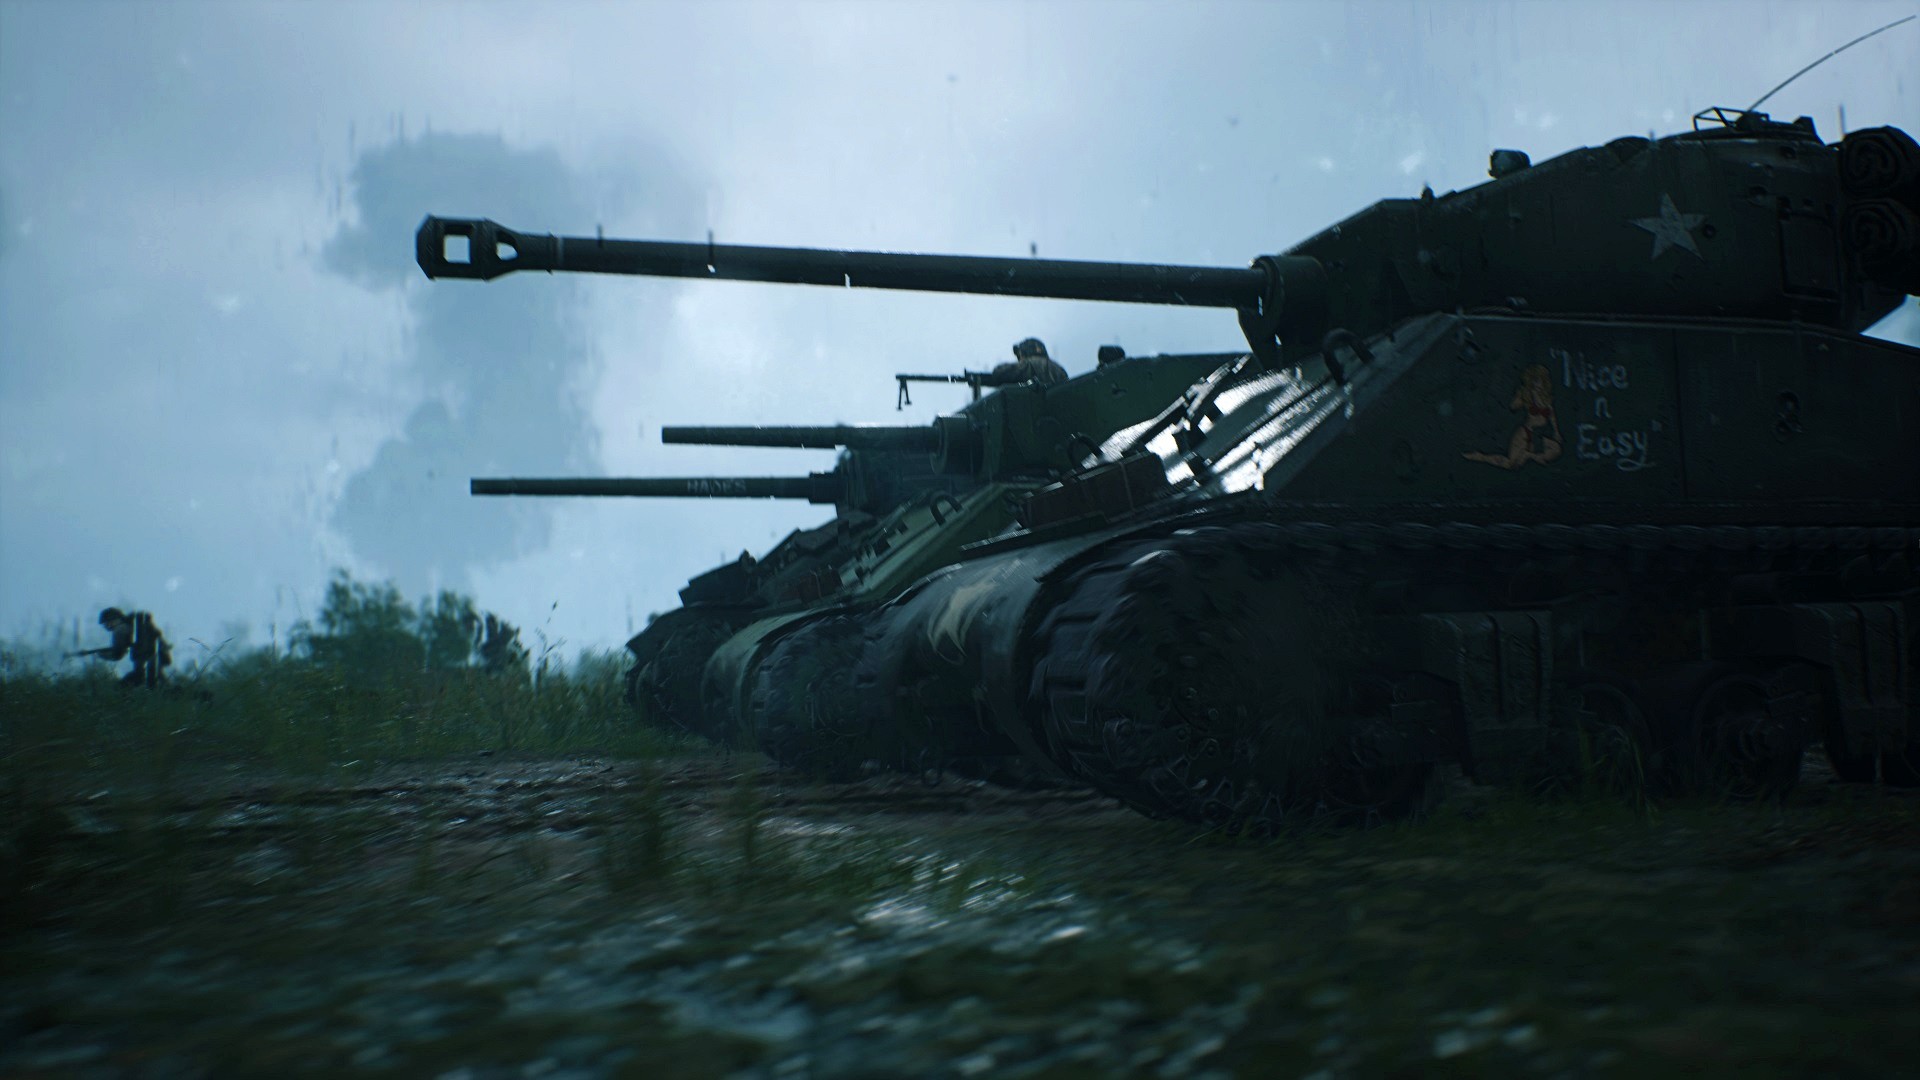 Best WW2 games: Hell Let Loose. Image shows tanks on the battlefield.